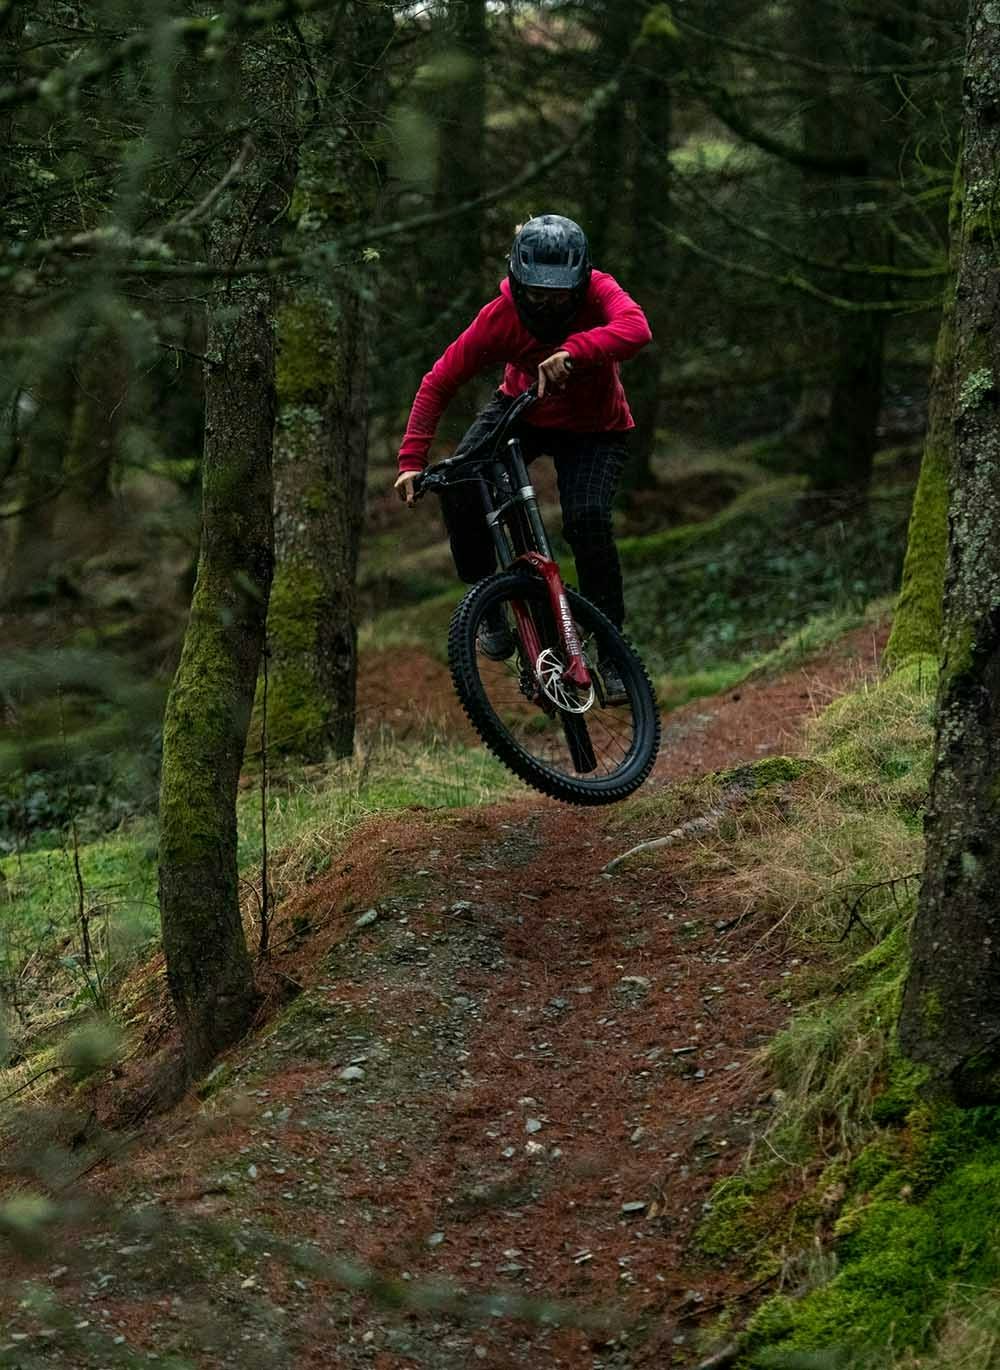 Veronique Sandler riding her downhill bike in the woods